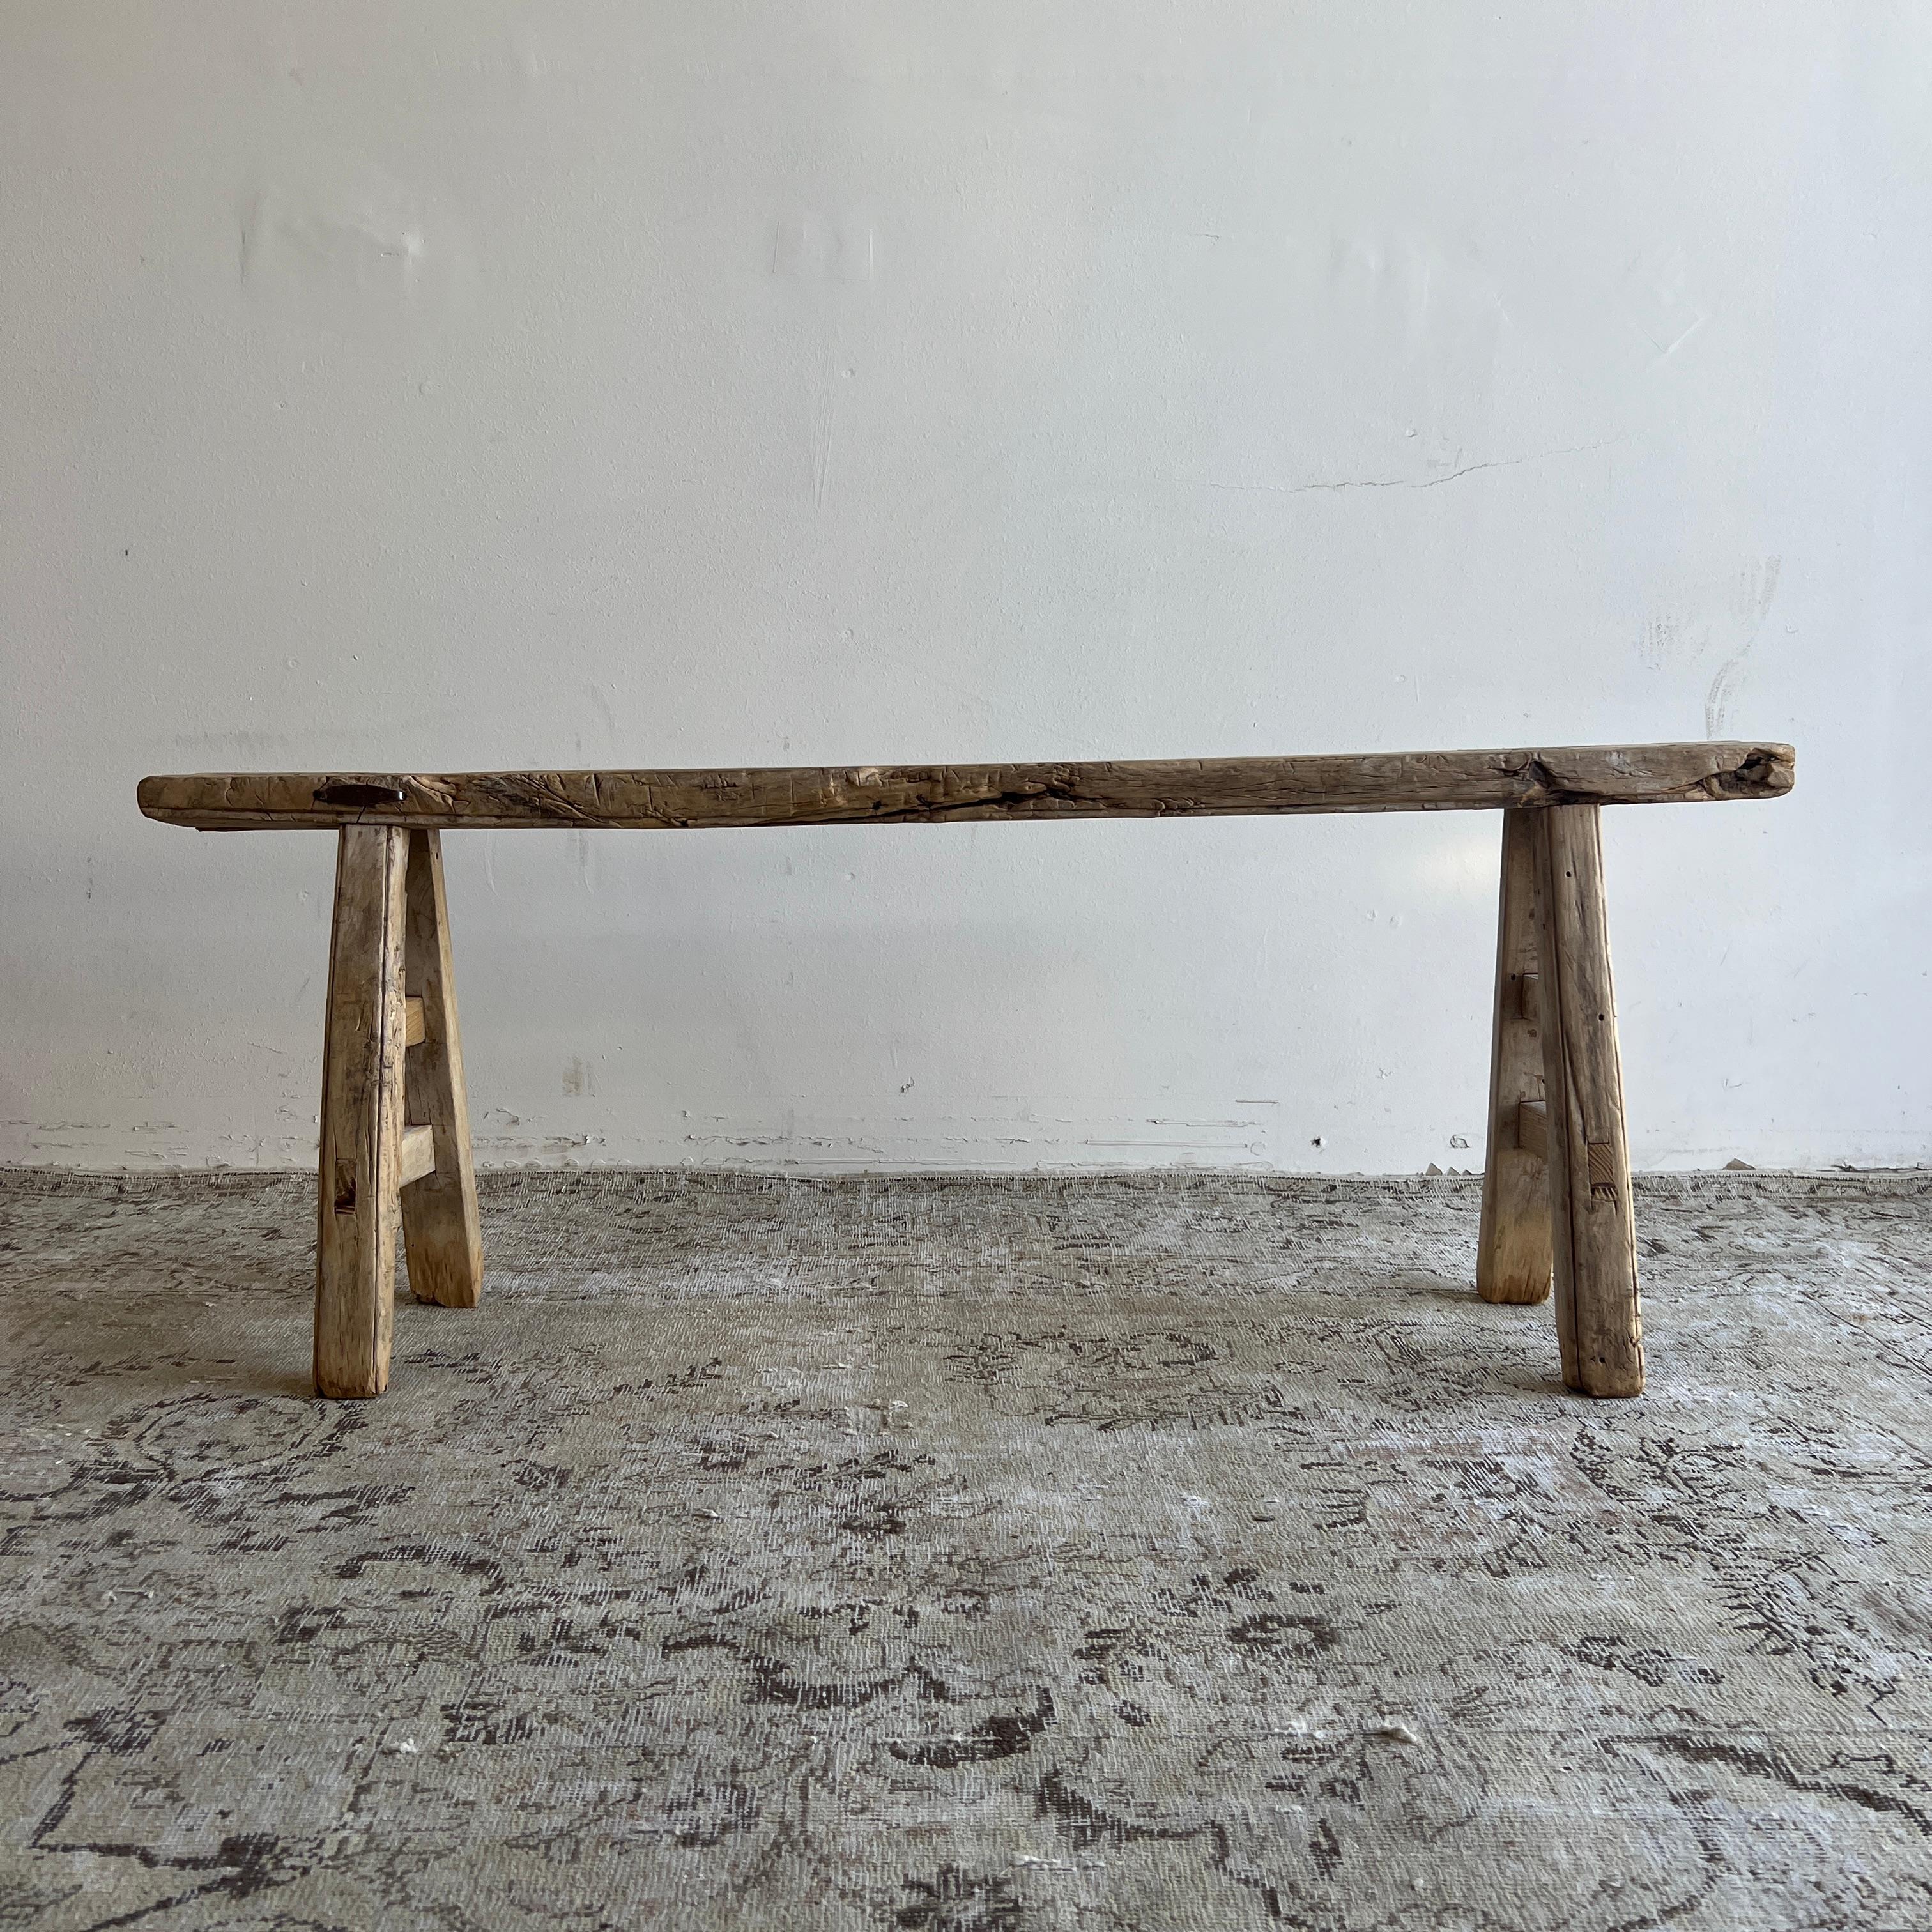 Vintage Antique elm wood bench.
These are the real vintage antique elm wood benches! Beautiful antique patina, with weathering and age, these are solid and sturdy ready for daily use, use as as a table behind a sofa, stool, coffee table, they are